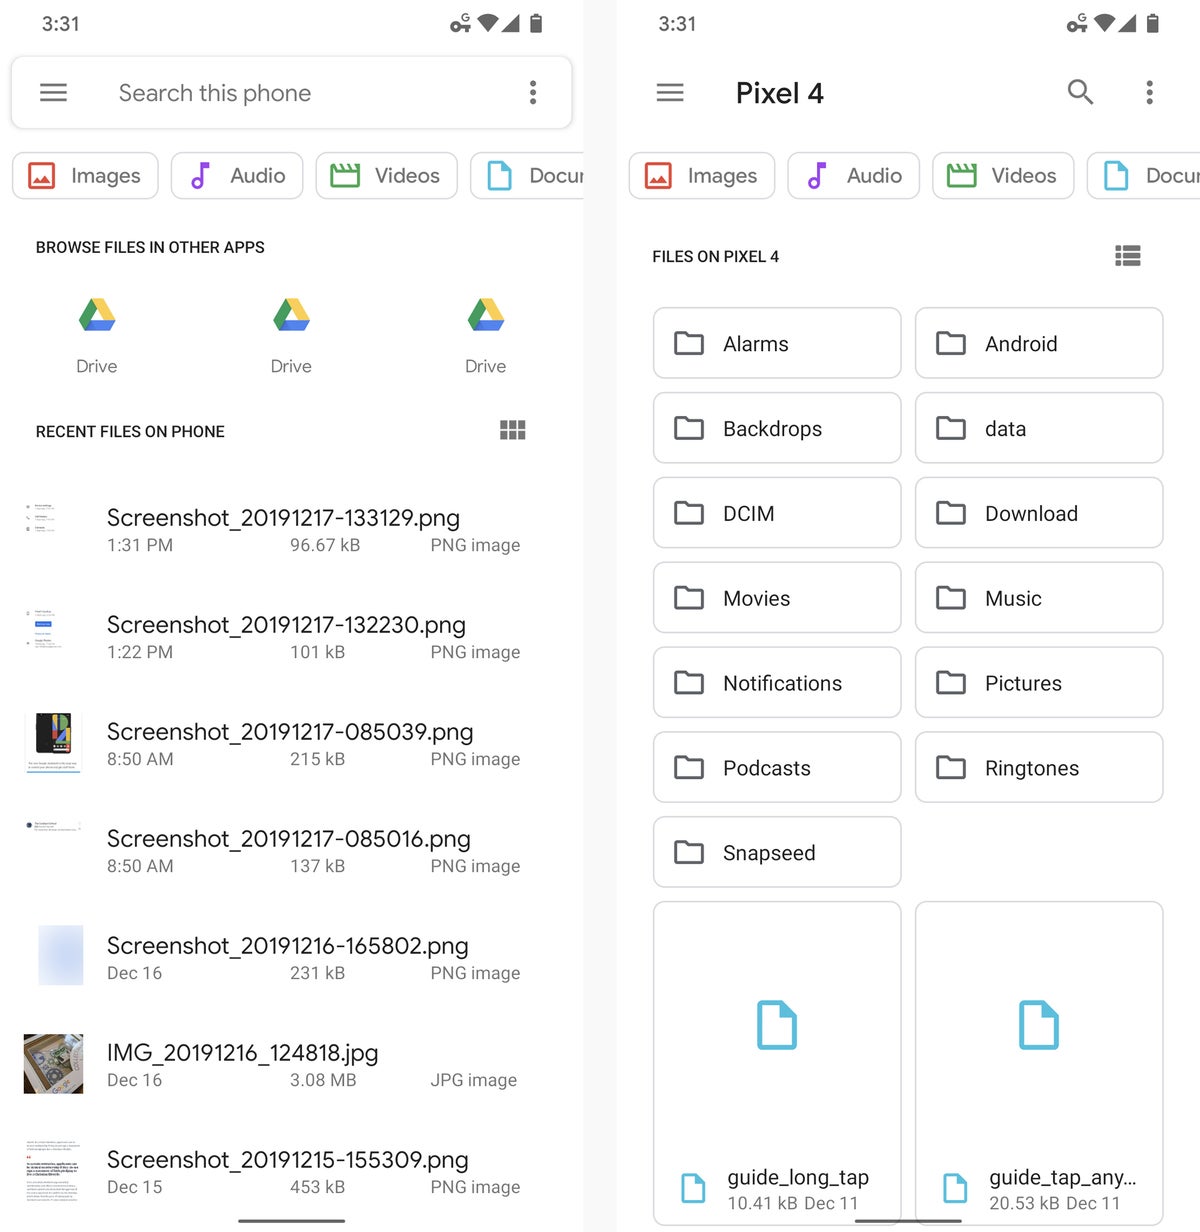 android file transfer pc windows 10